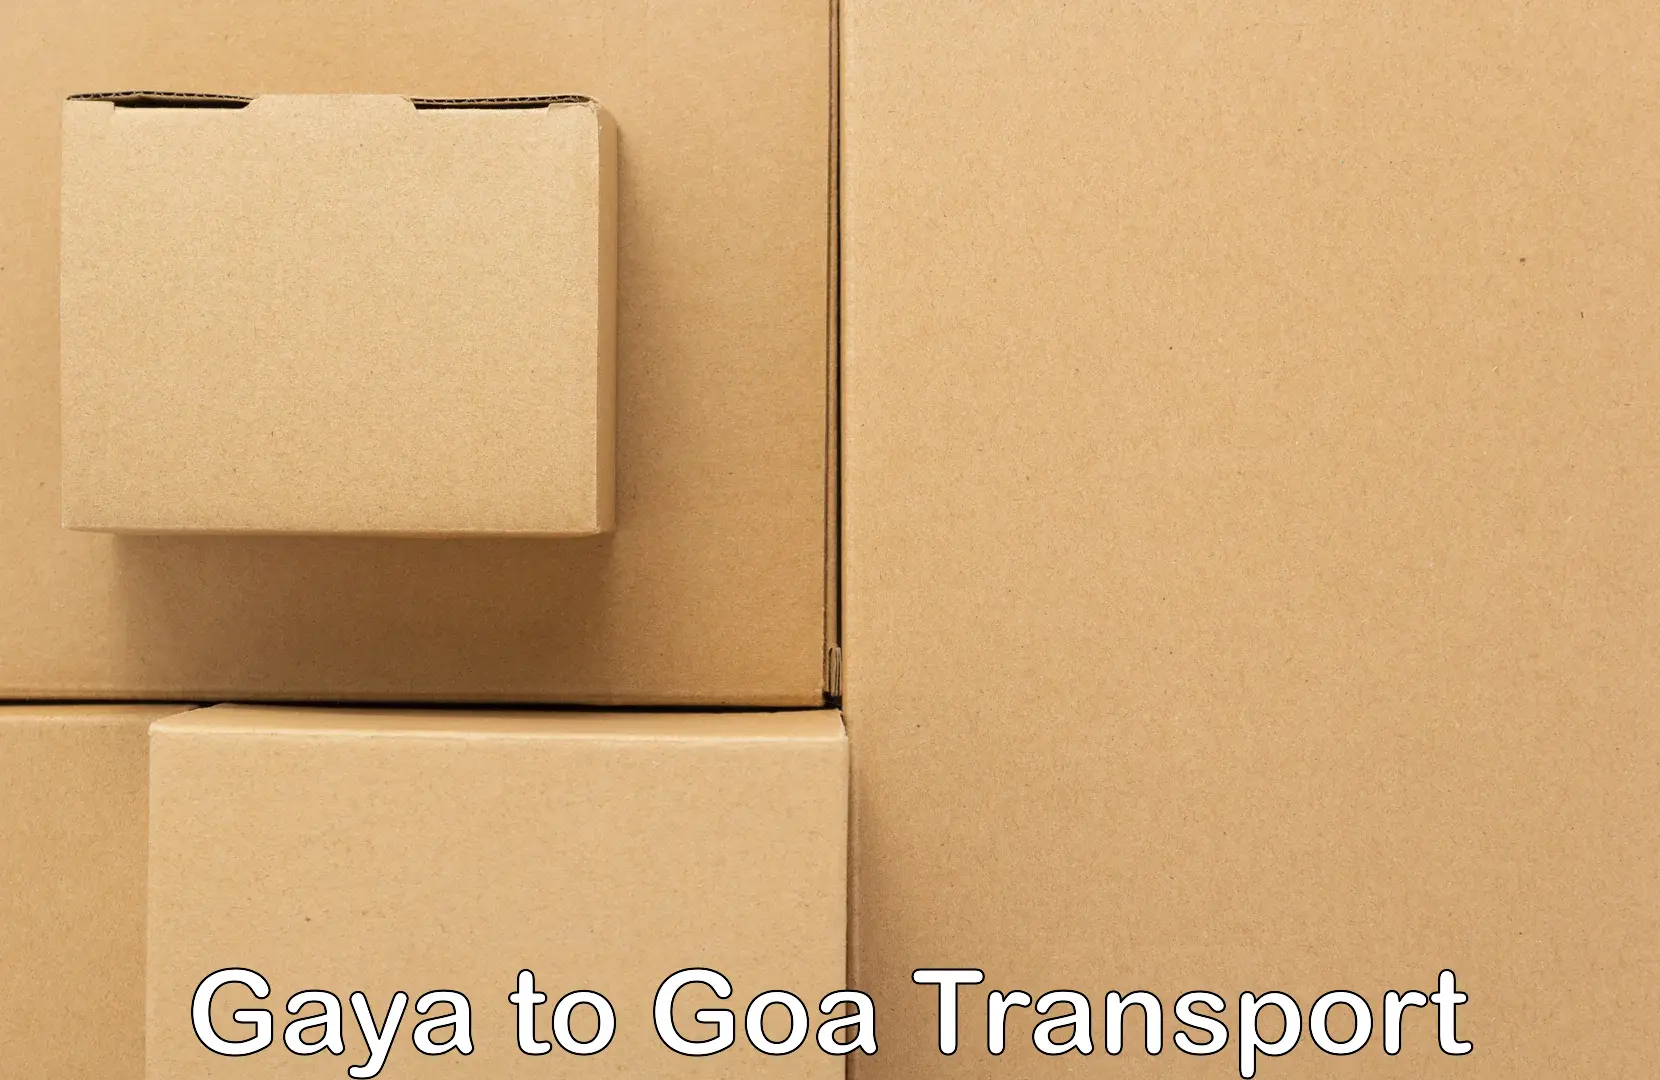 Commercial transport service Gaya to Goa